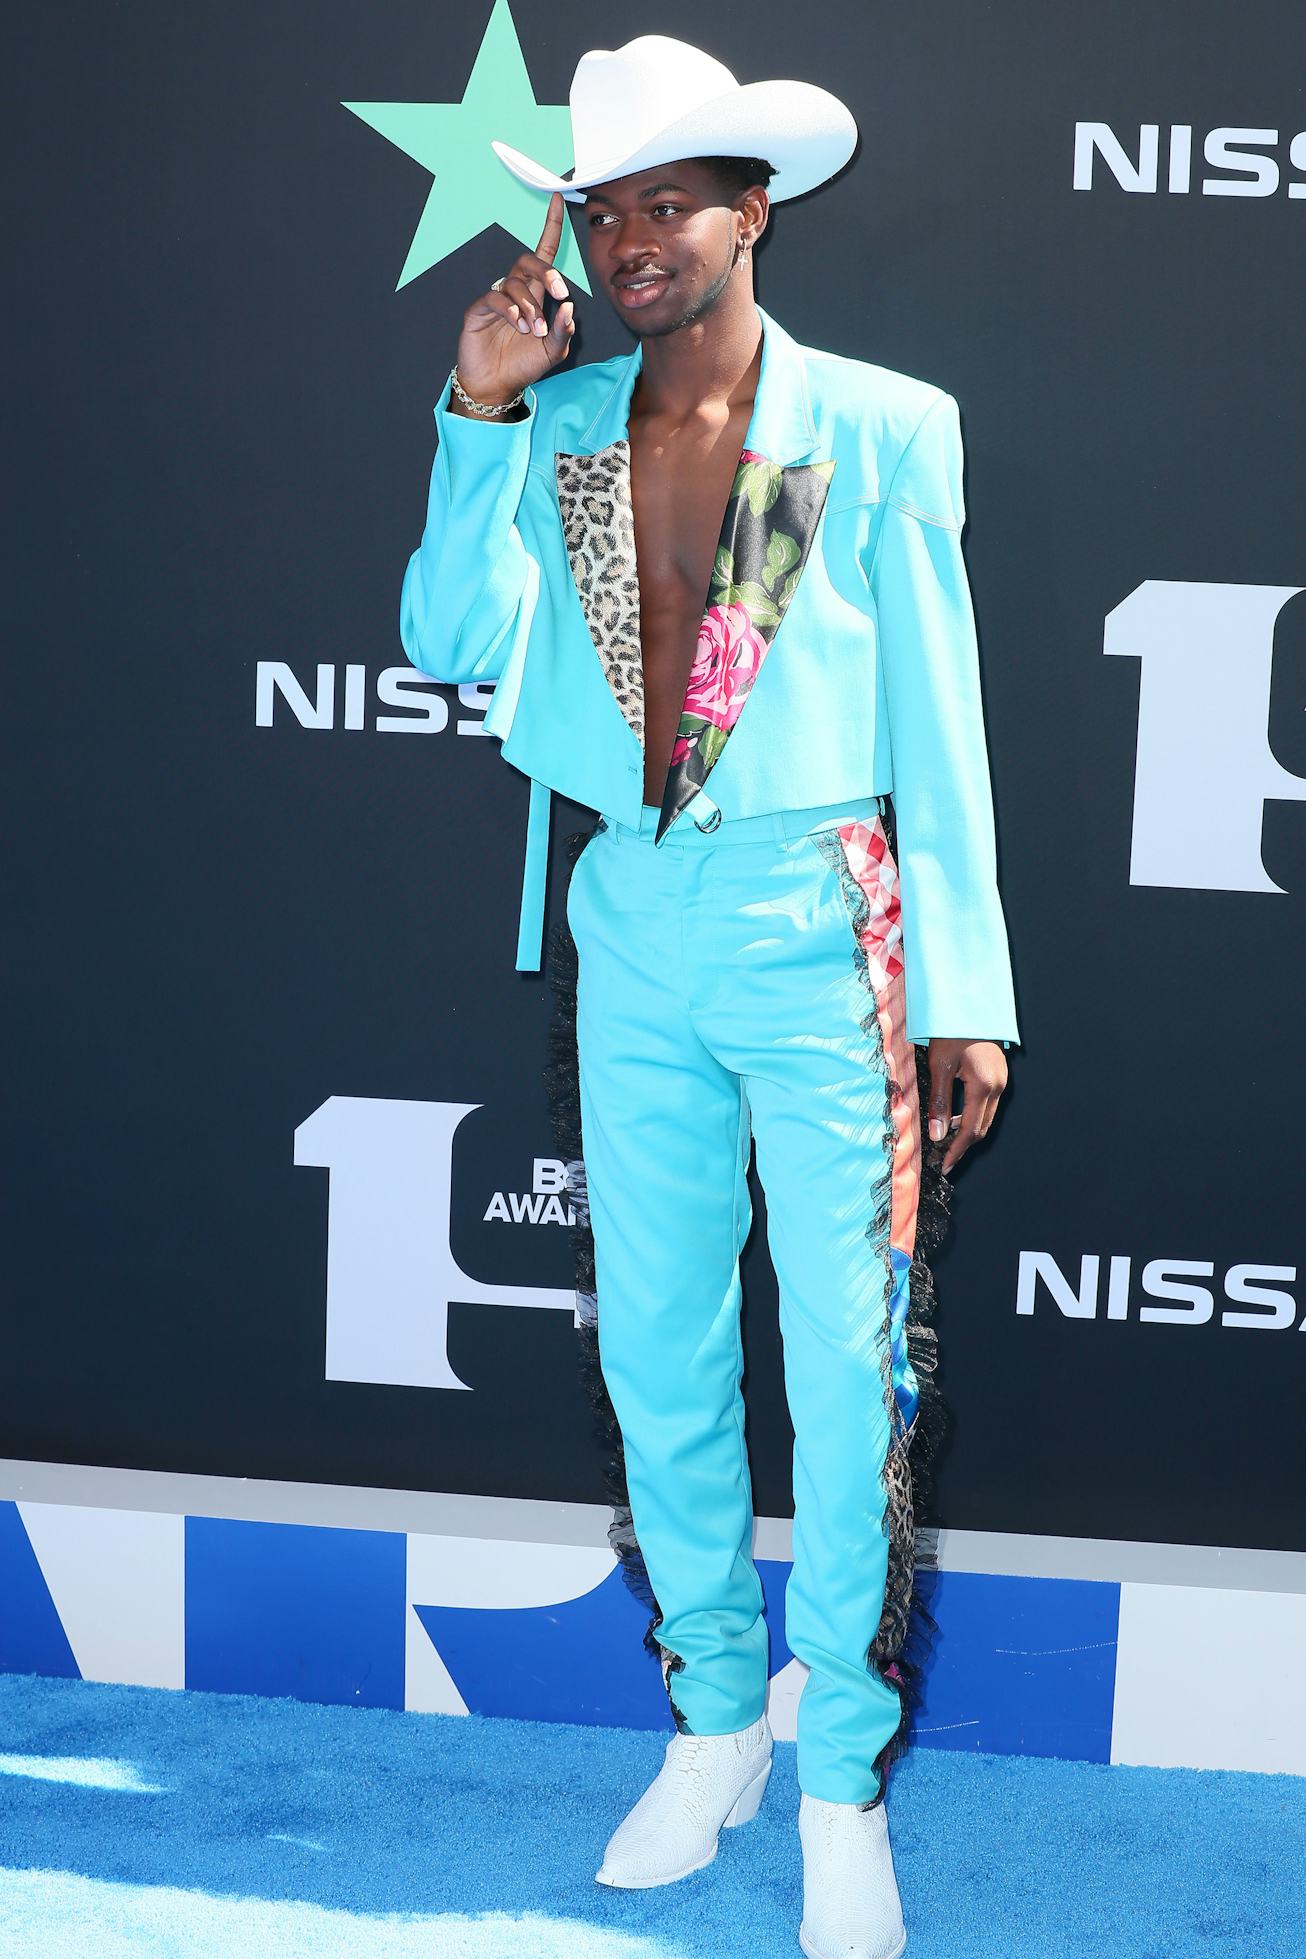 LOS ANGELES, CALIFORNIA - JUNE 23: Lil Nas X attends the 2019 BET Awards on June 23, 2019 in Los Ang...